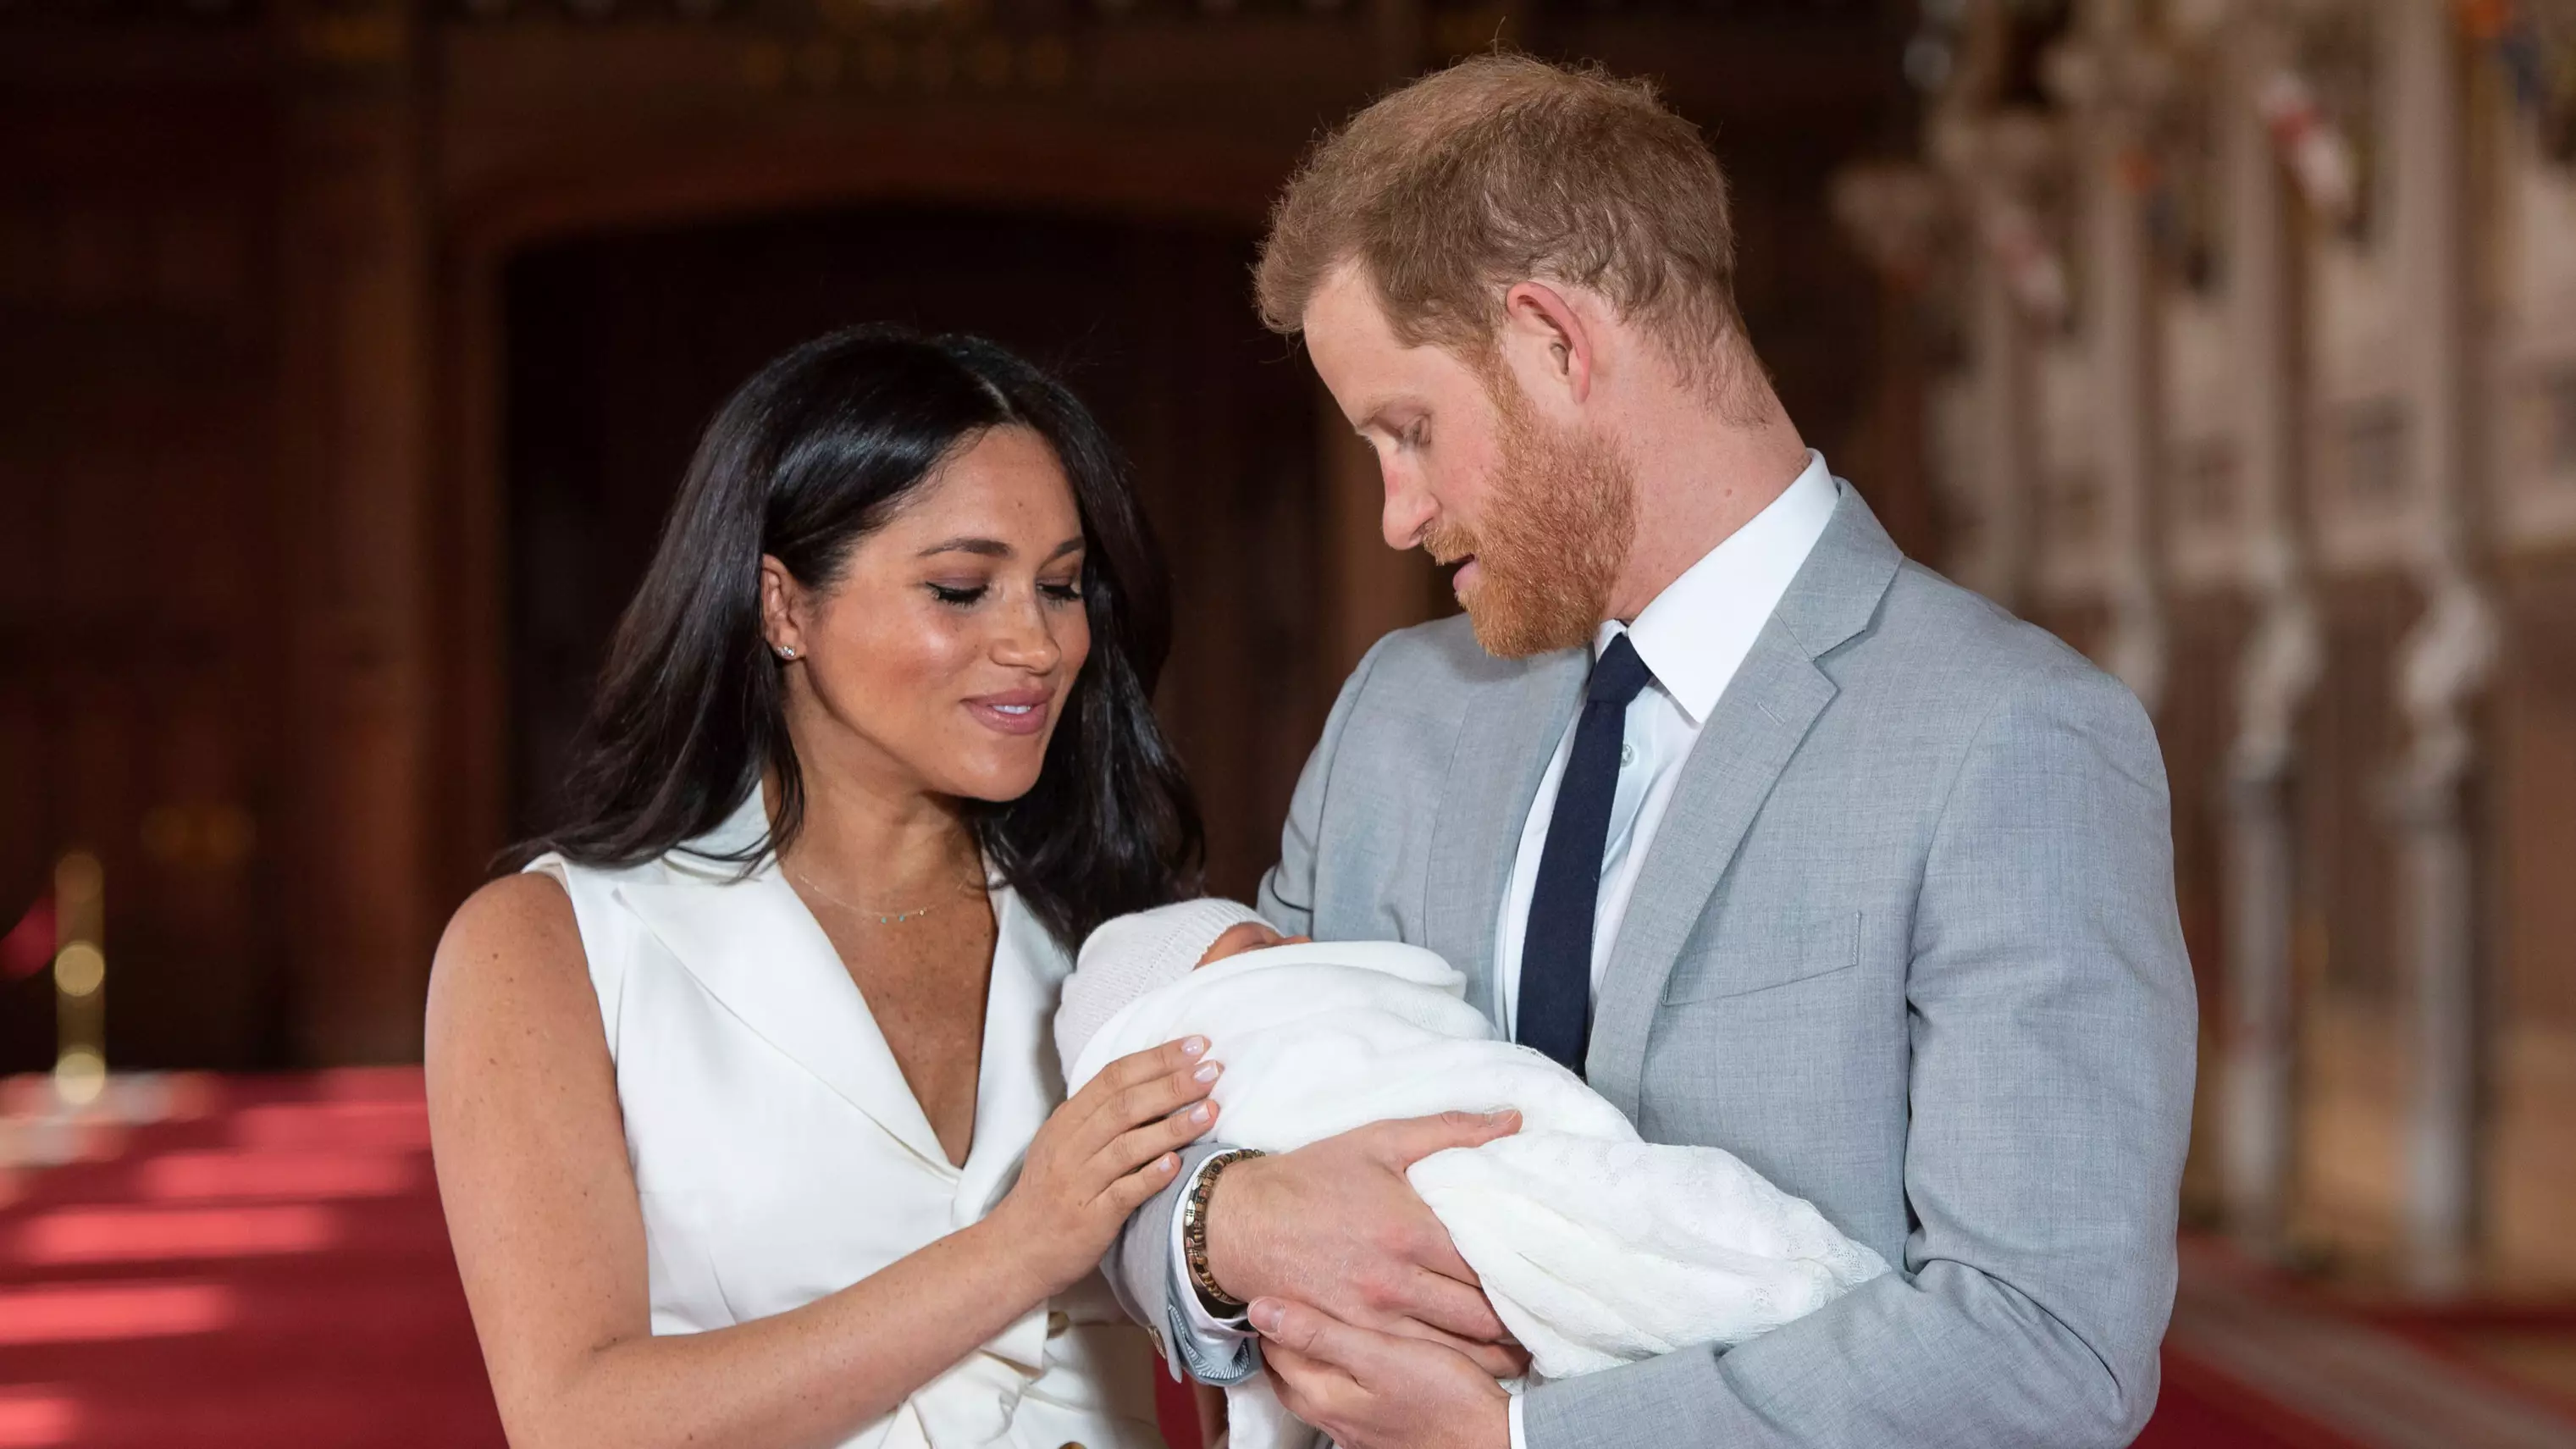 Prince Harry And Meghan Markle Release Adorable Image Of Archie On 2nd Birthday